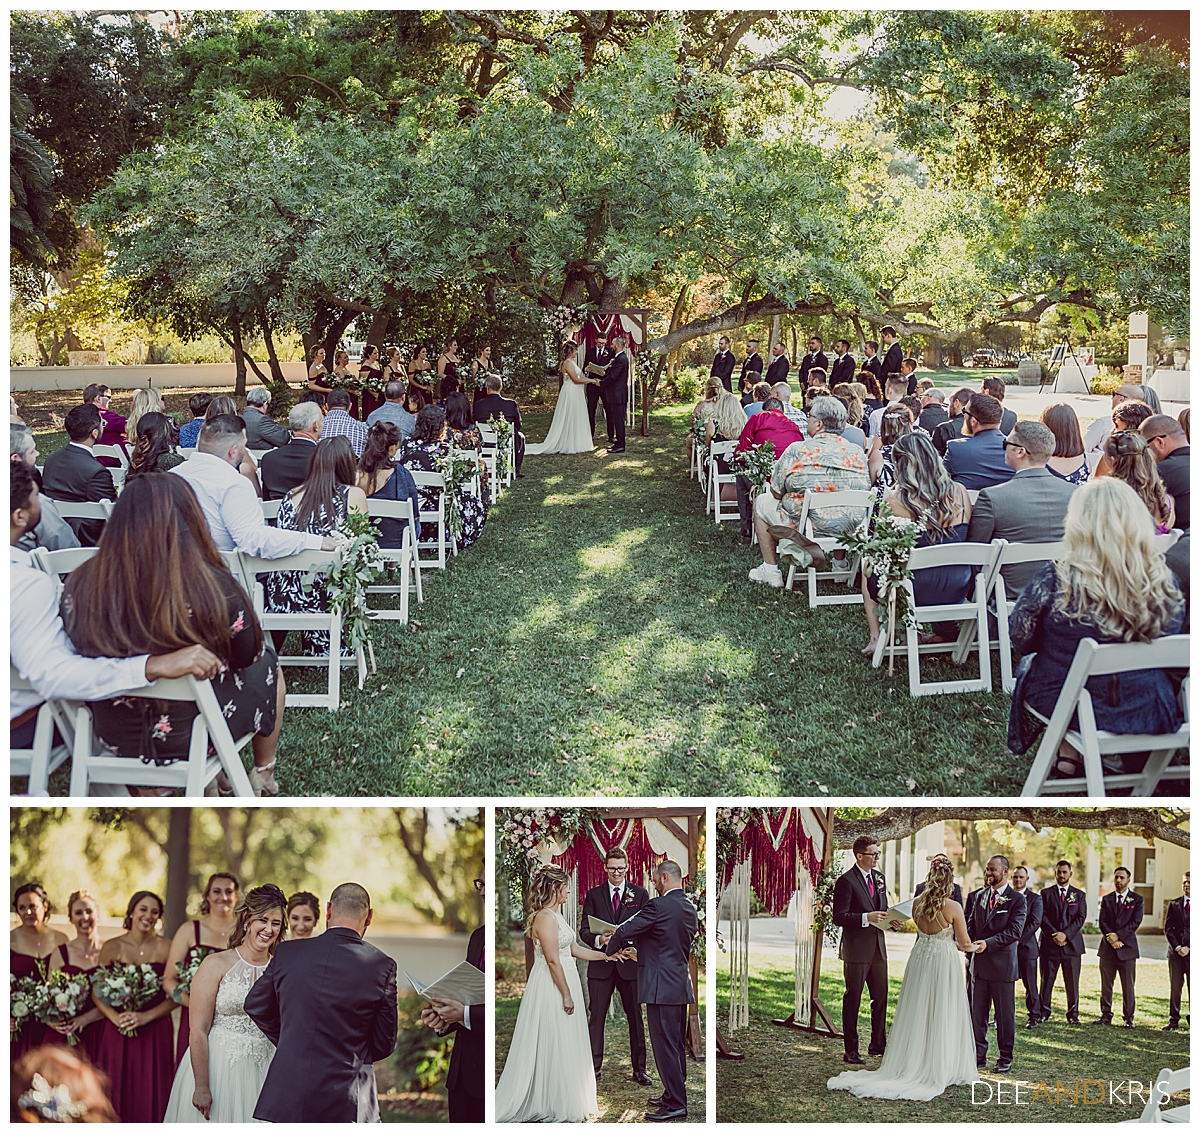 Four images of the vows and ring exchange.